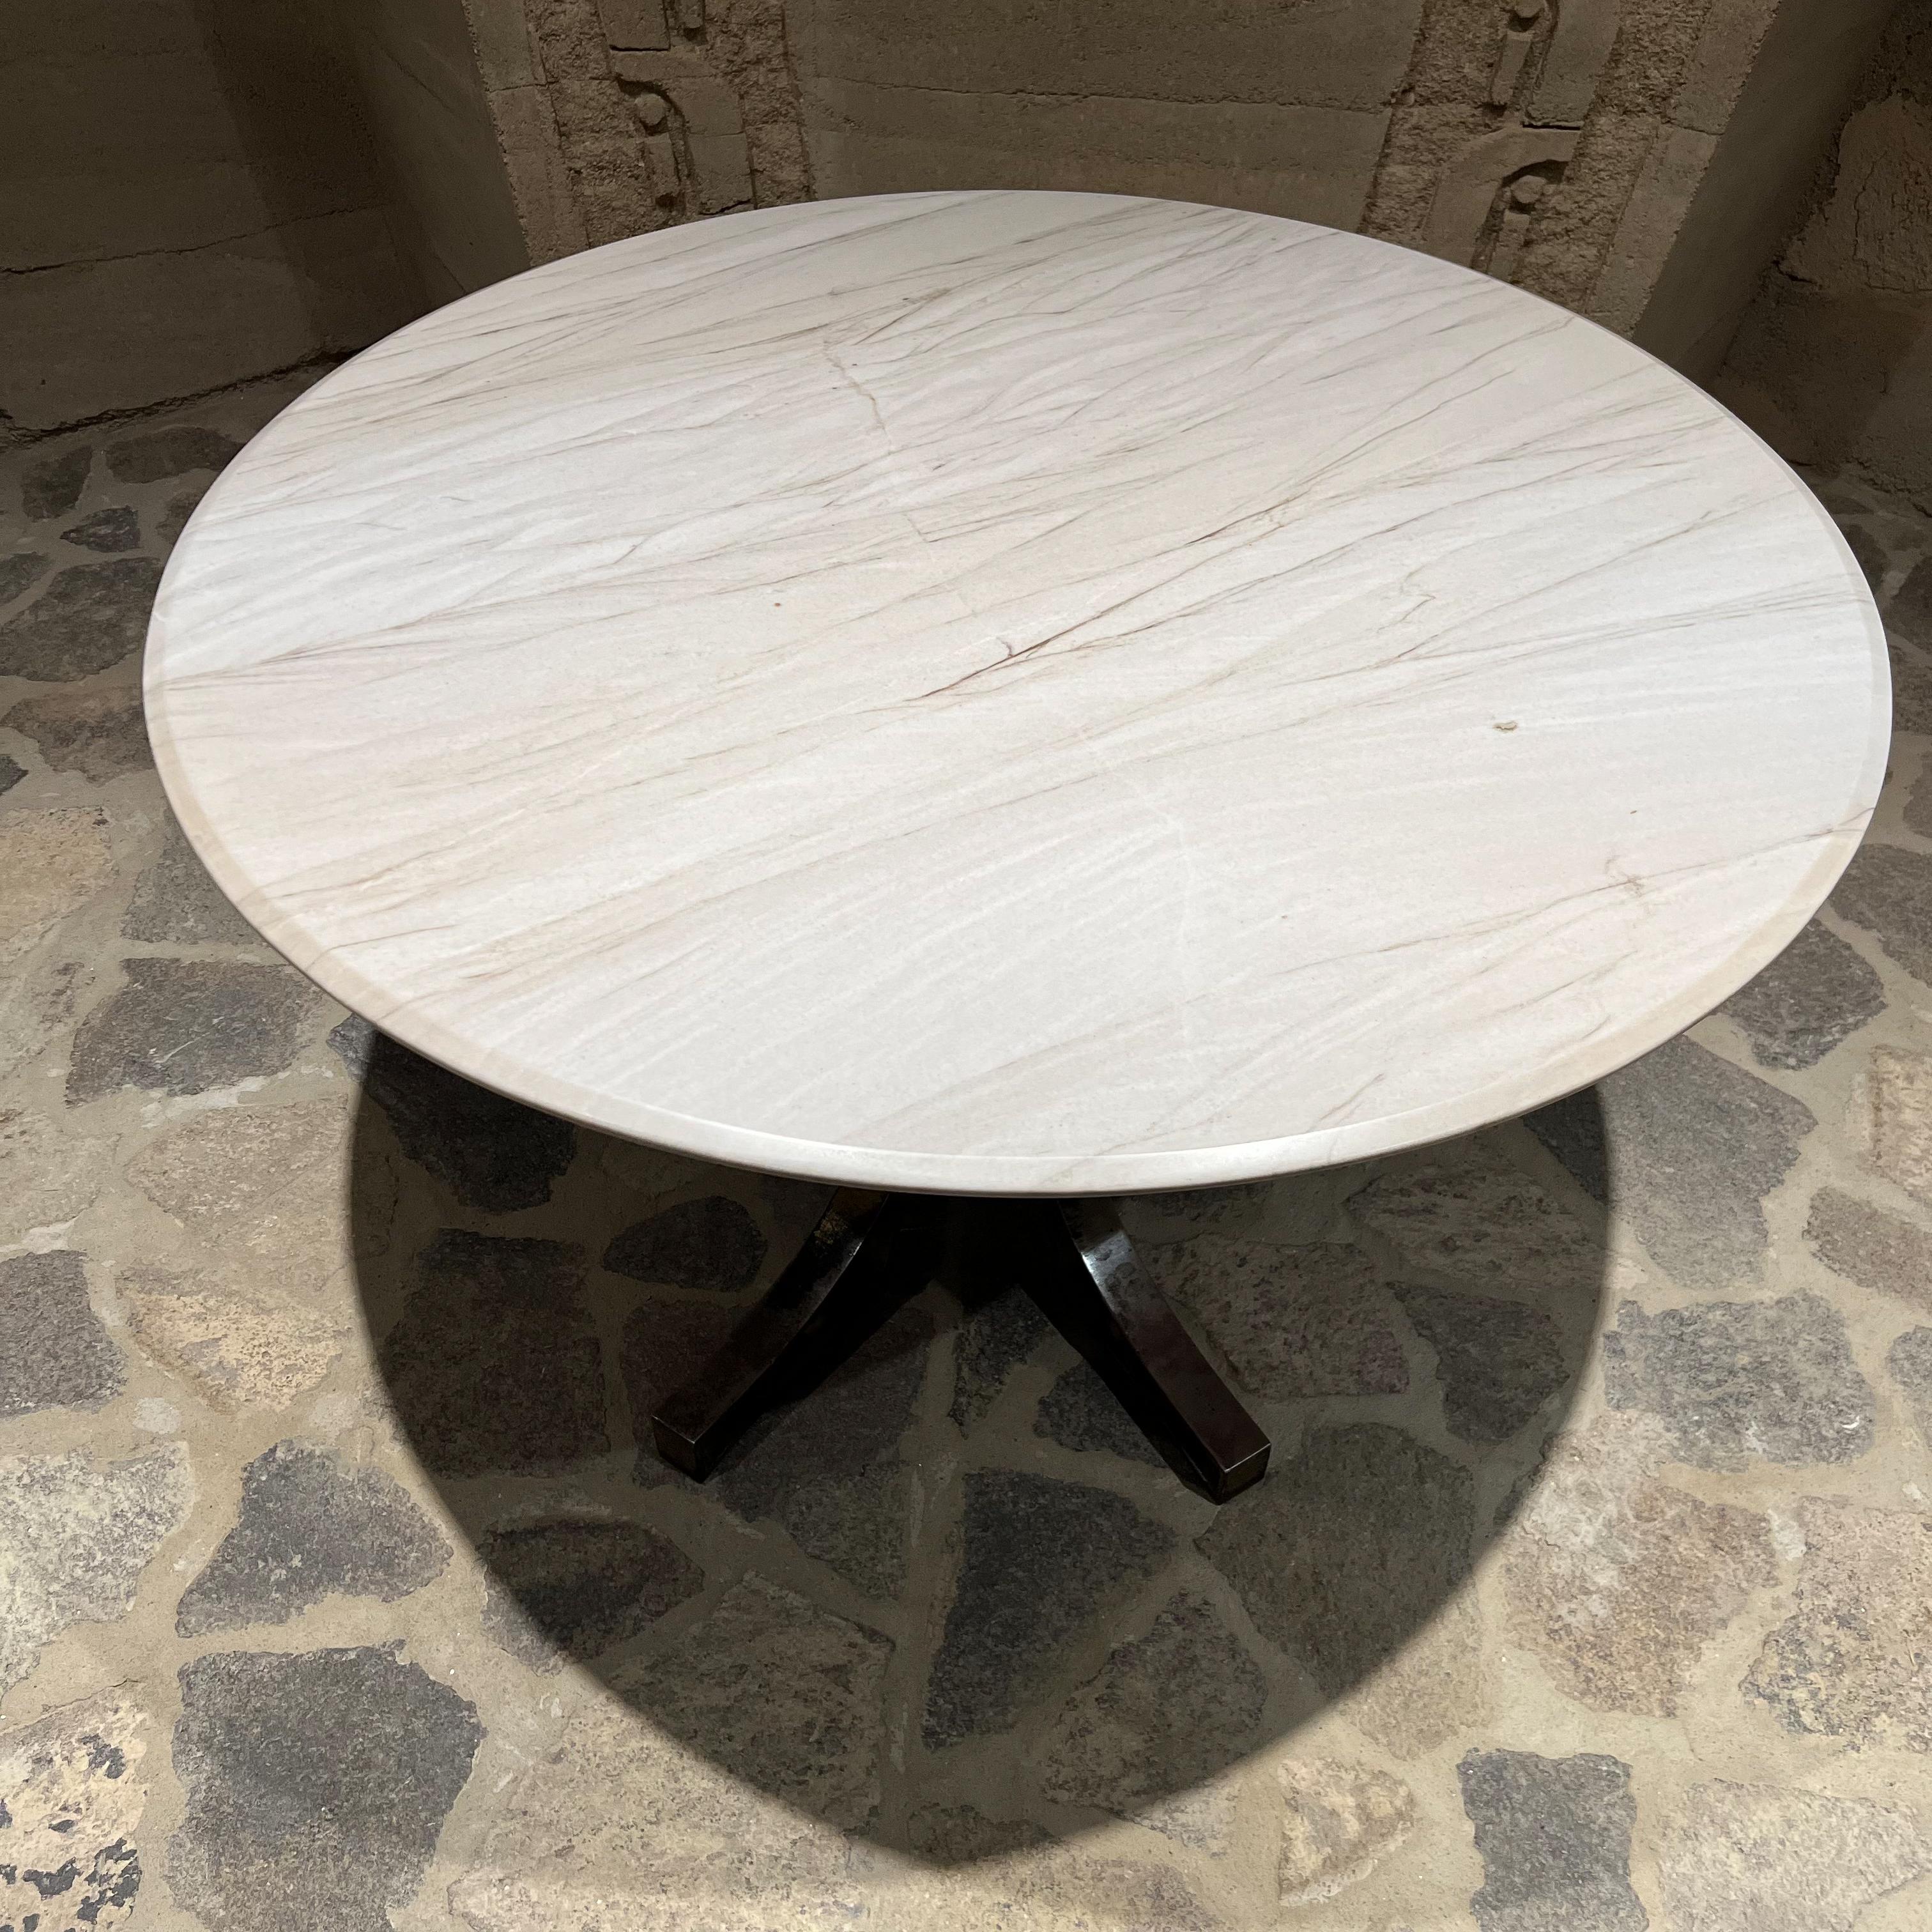 Iron Modernist Dining Table in White Marble Sculptural Base Arturo Pani Mexico City For Sale